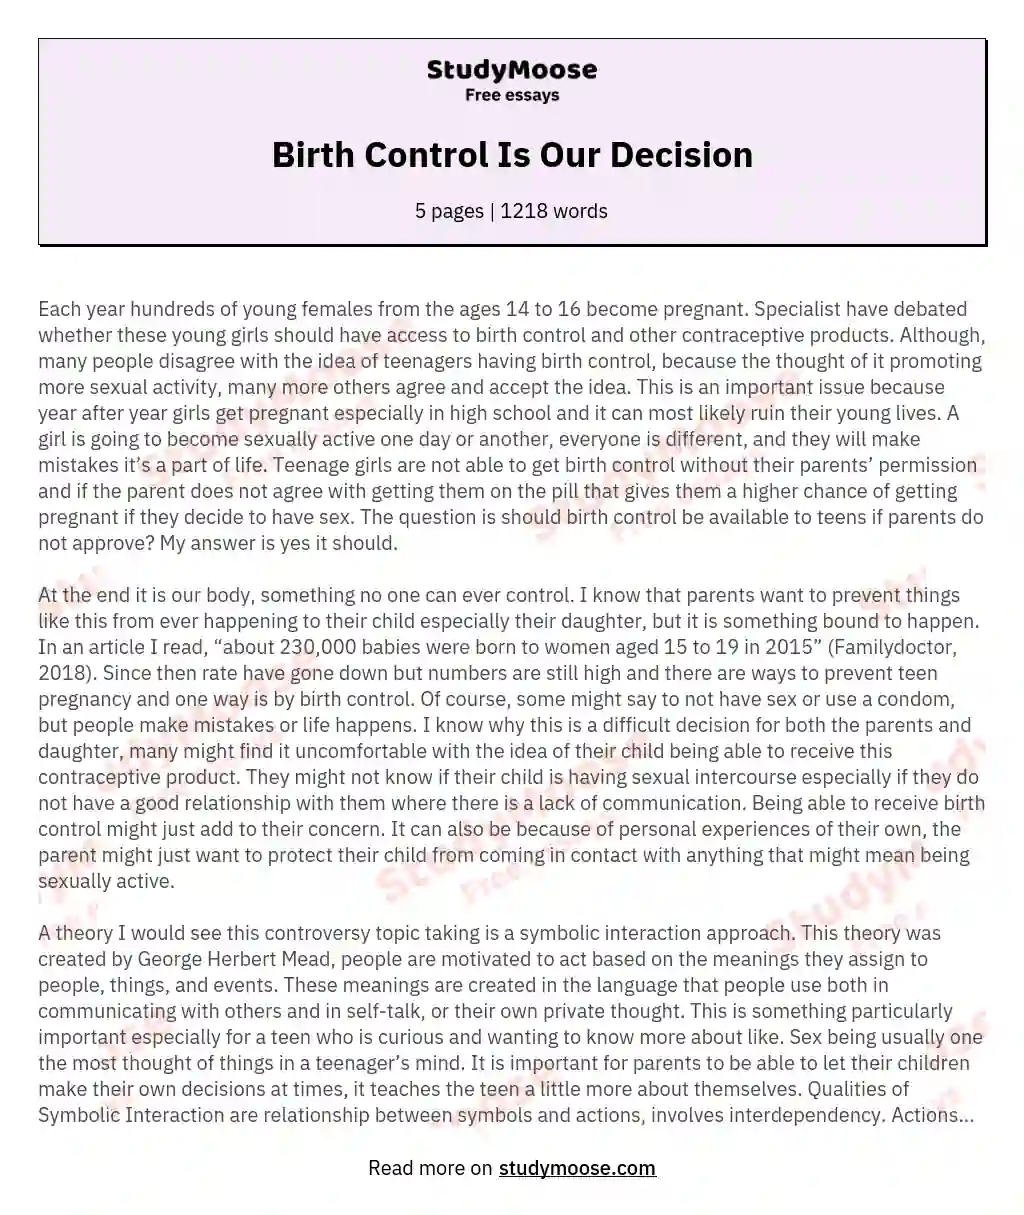 Birth Control Is Our Decision essay